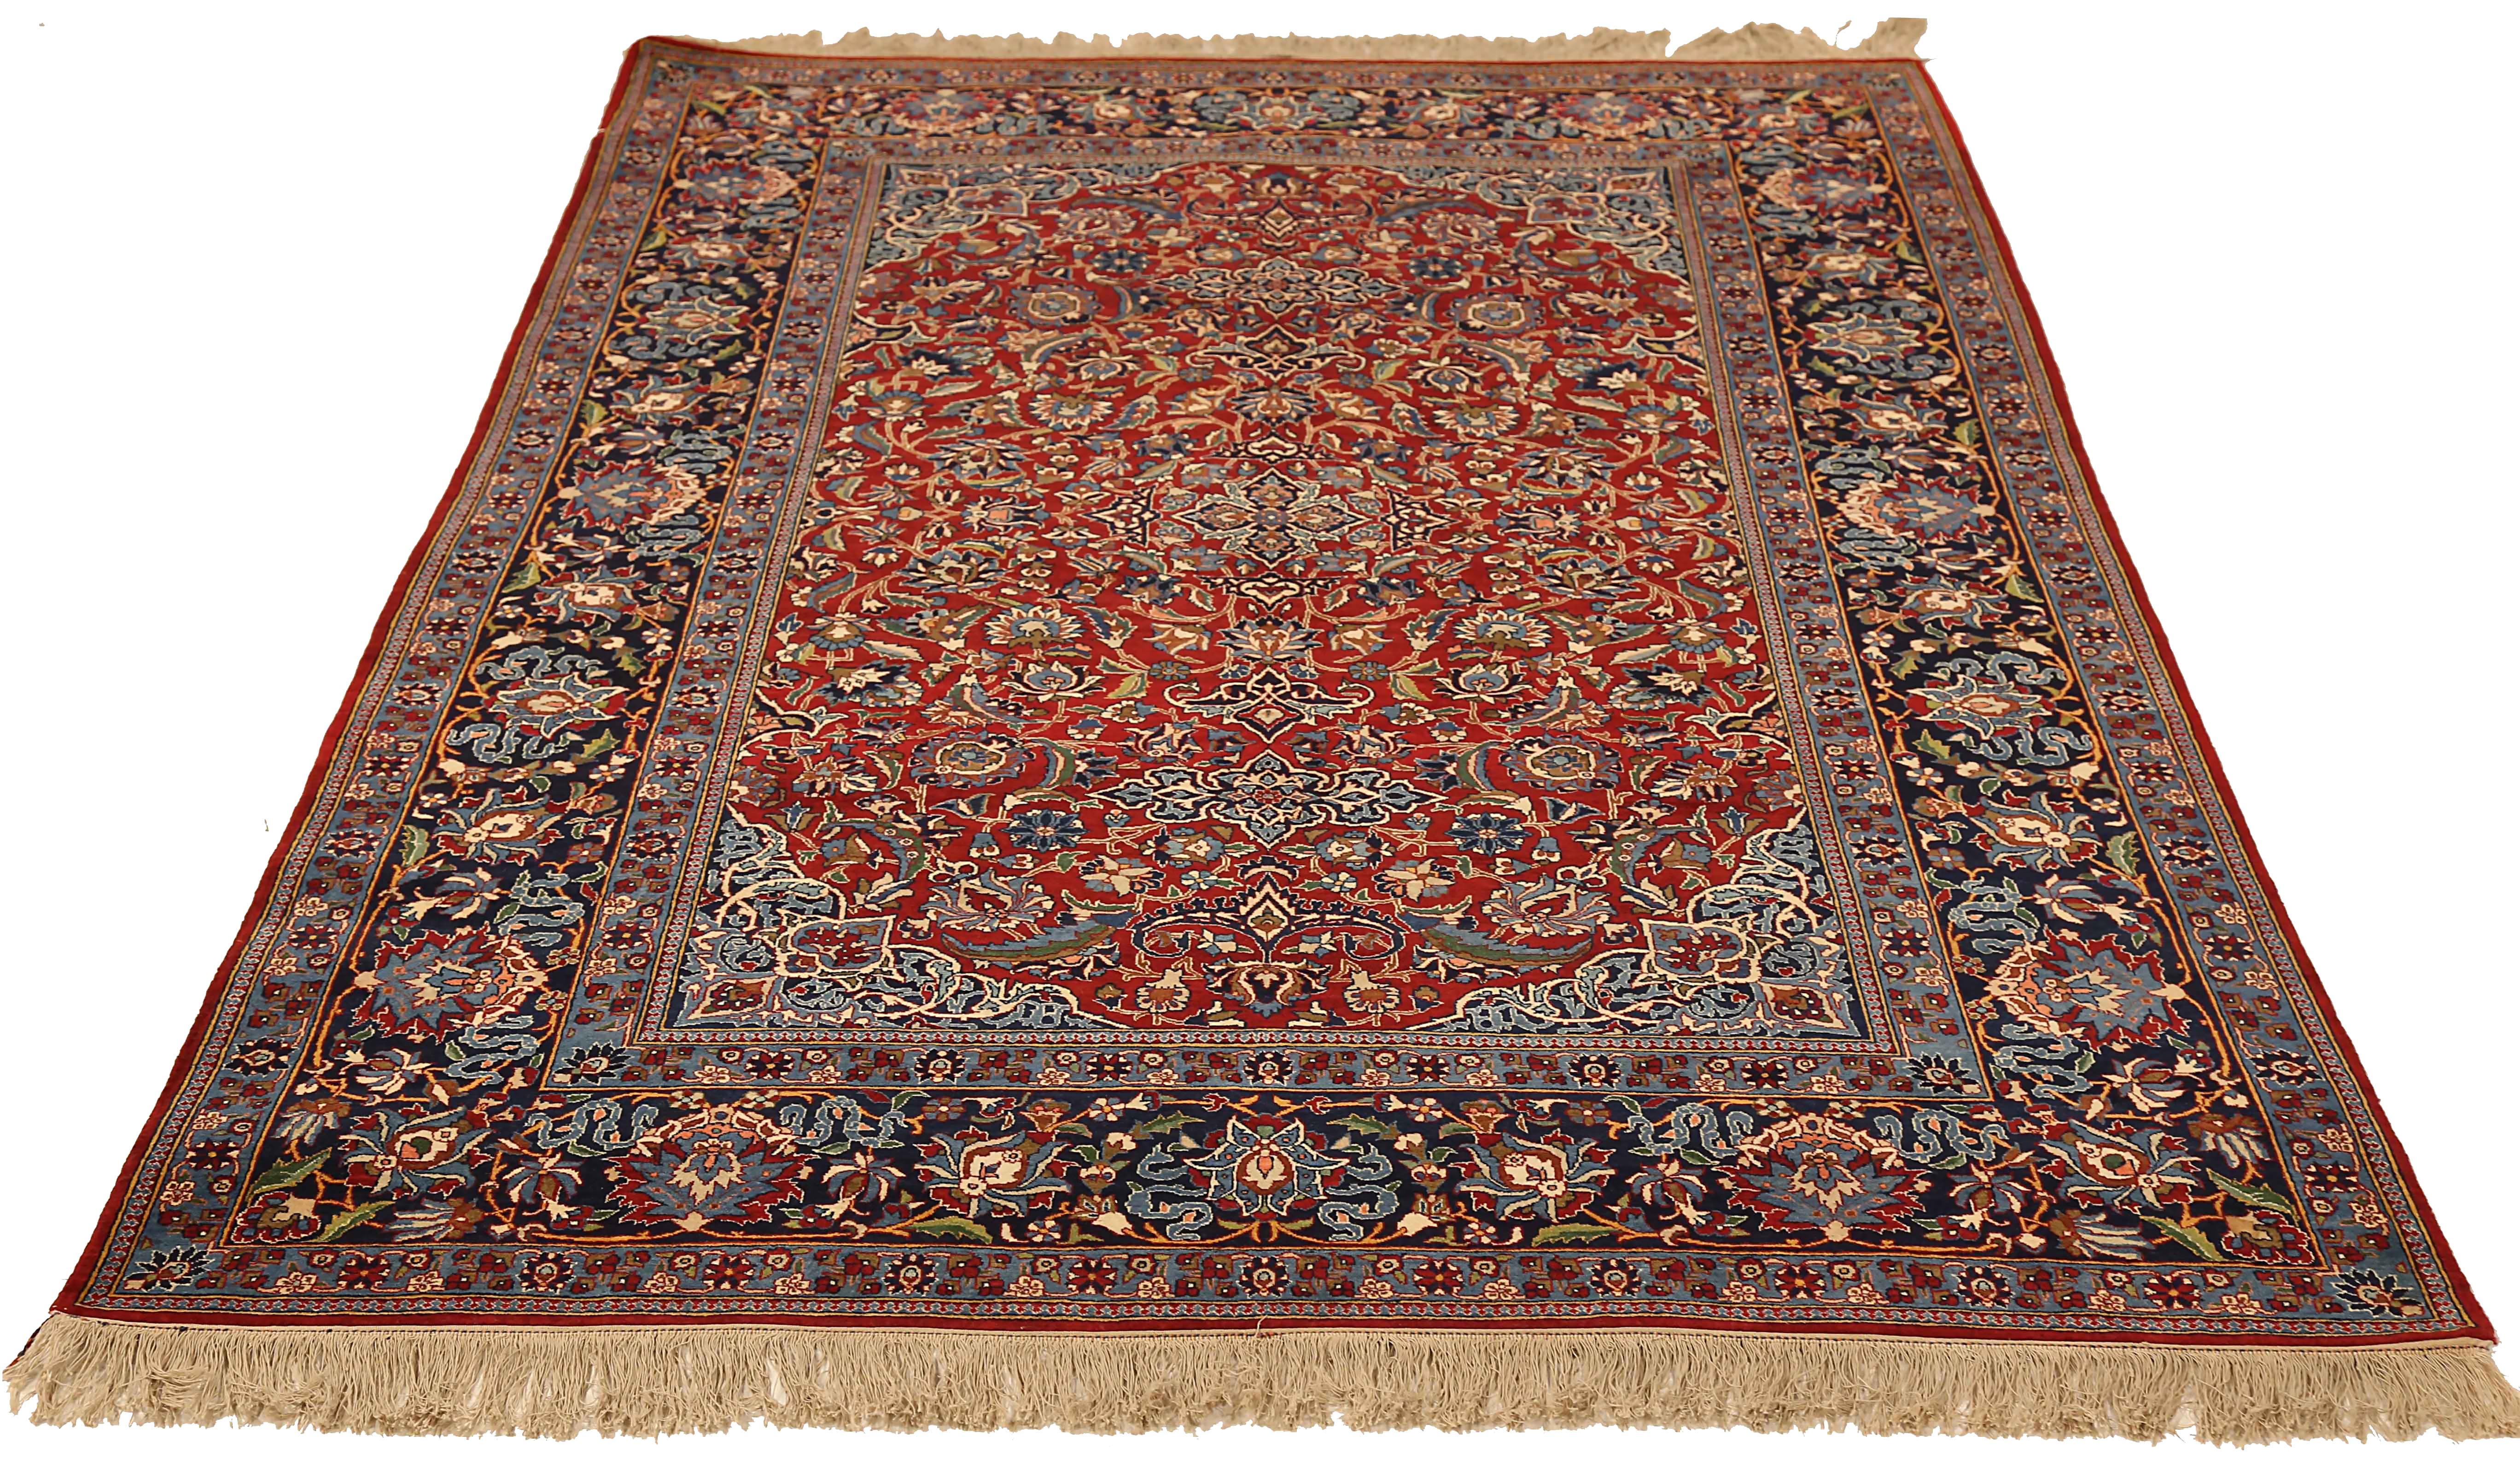 Antique area rug handwoven from the finest sheep’s wool. It’s colored with all-natural vegetable dyes that are safe for humans and pets. It’s a traditional Naien design handwoven by expert artisans. It’s a lovely area rug that can be incorporated